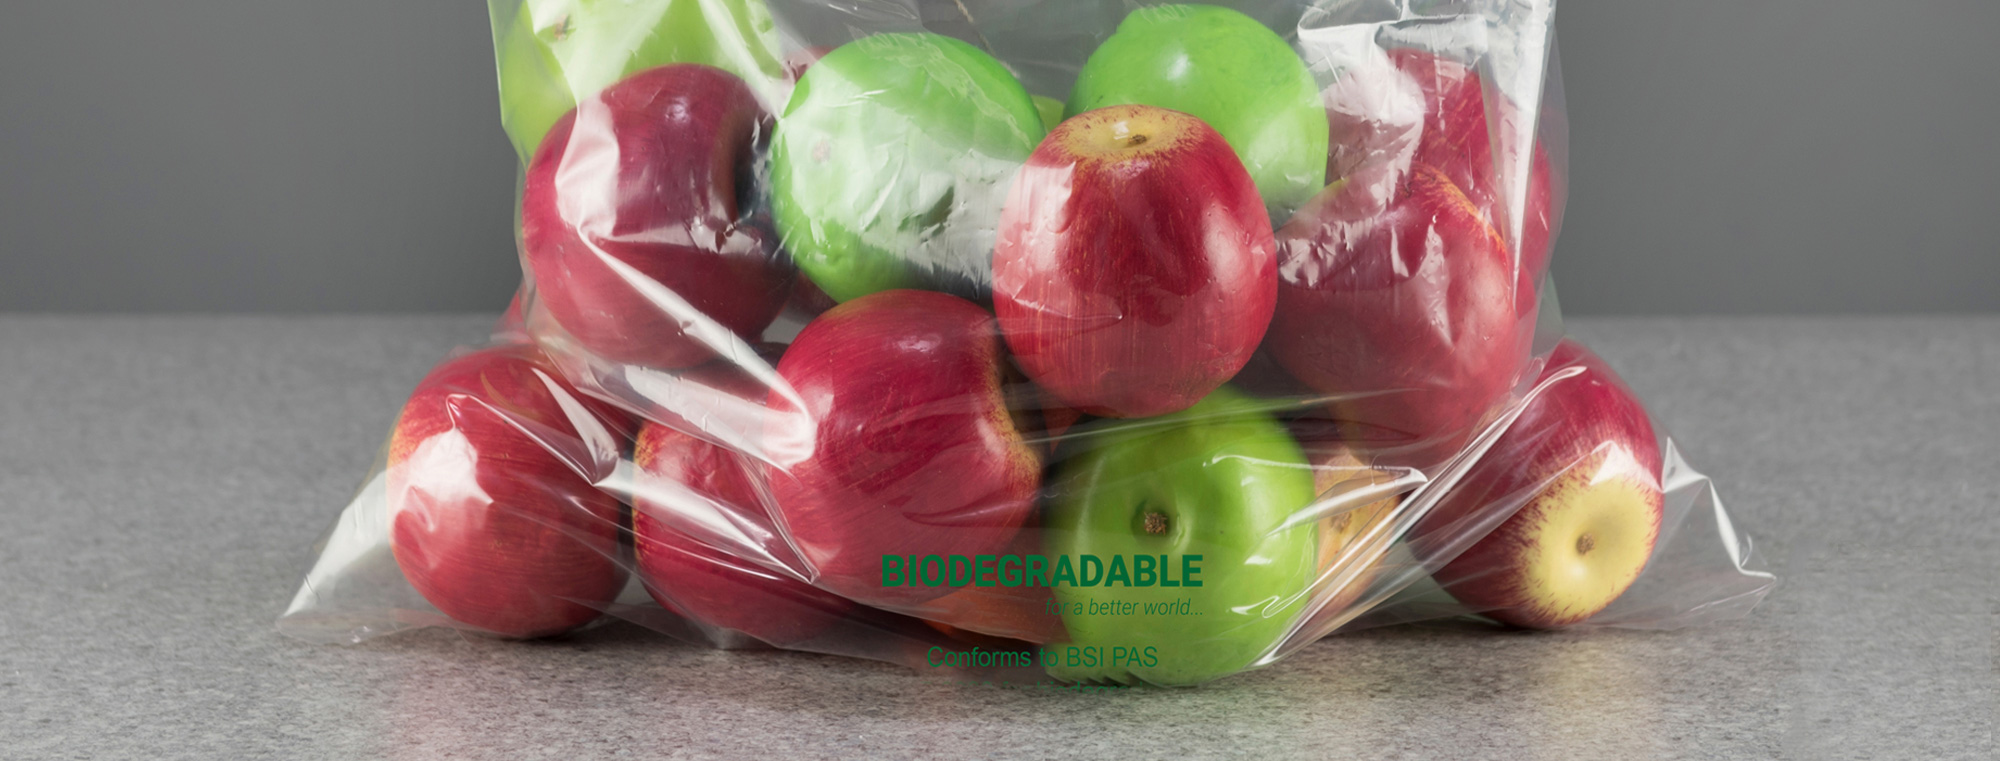 Biotransformation bag with apples